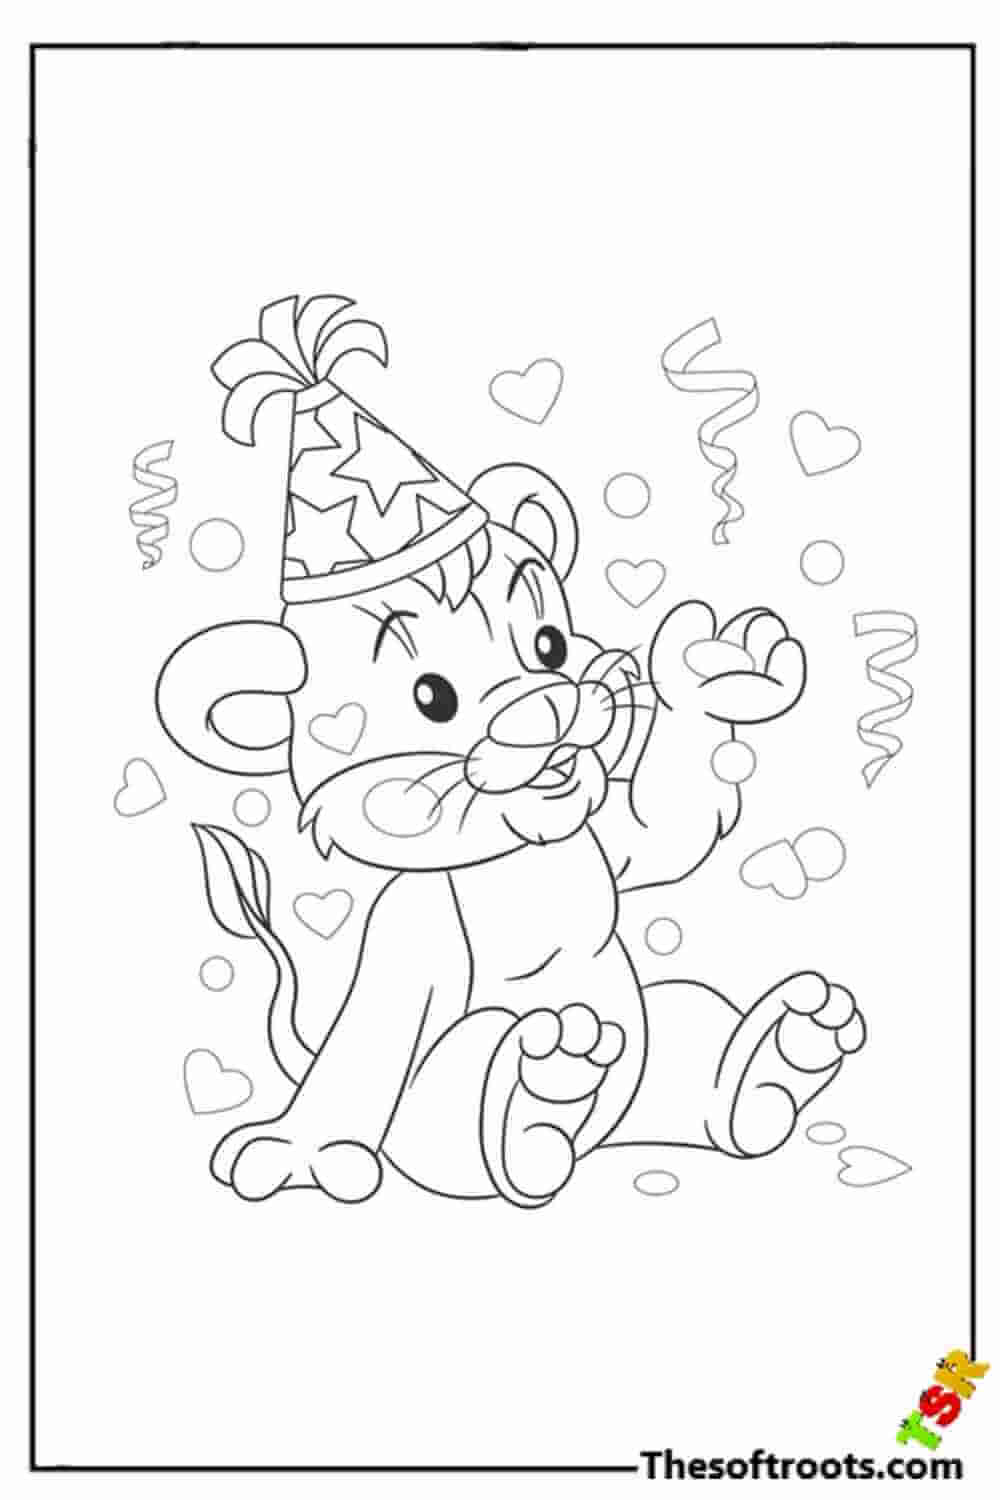 Year of tigers coloring pages